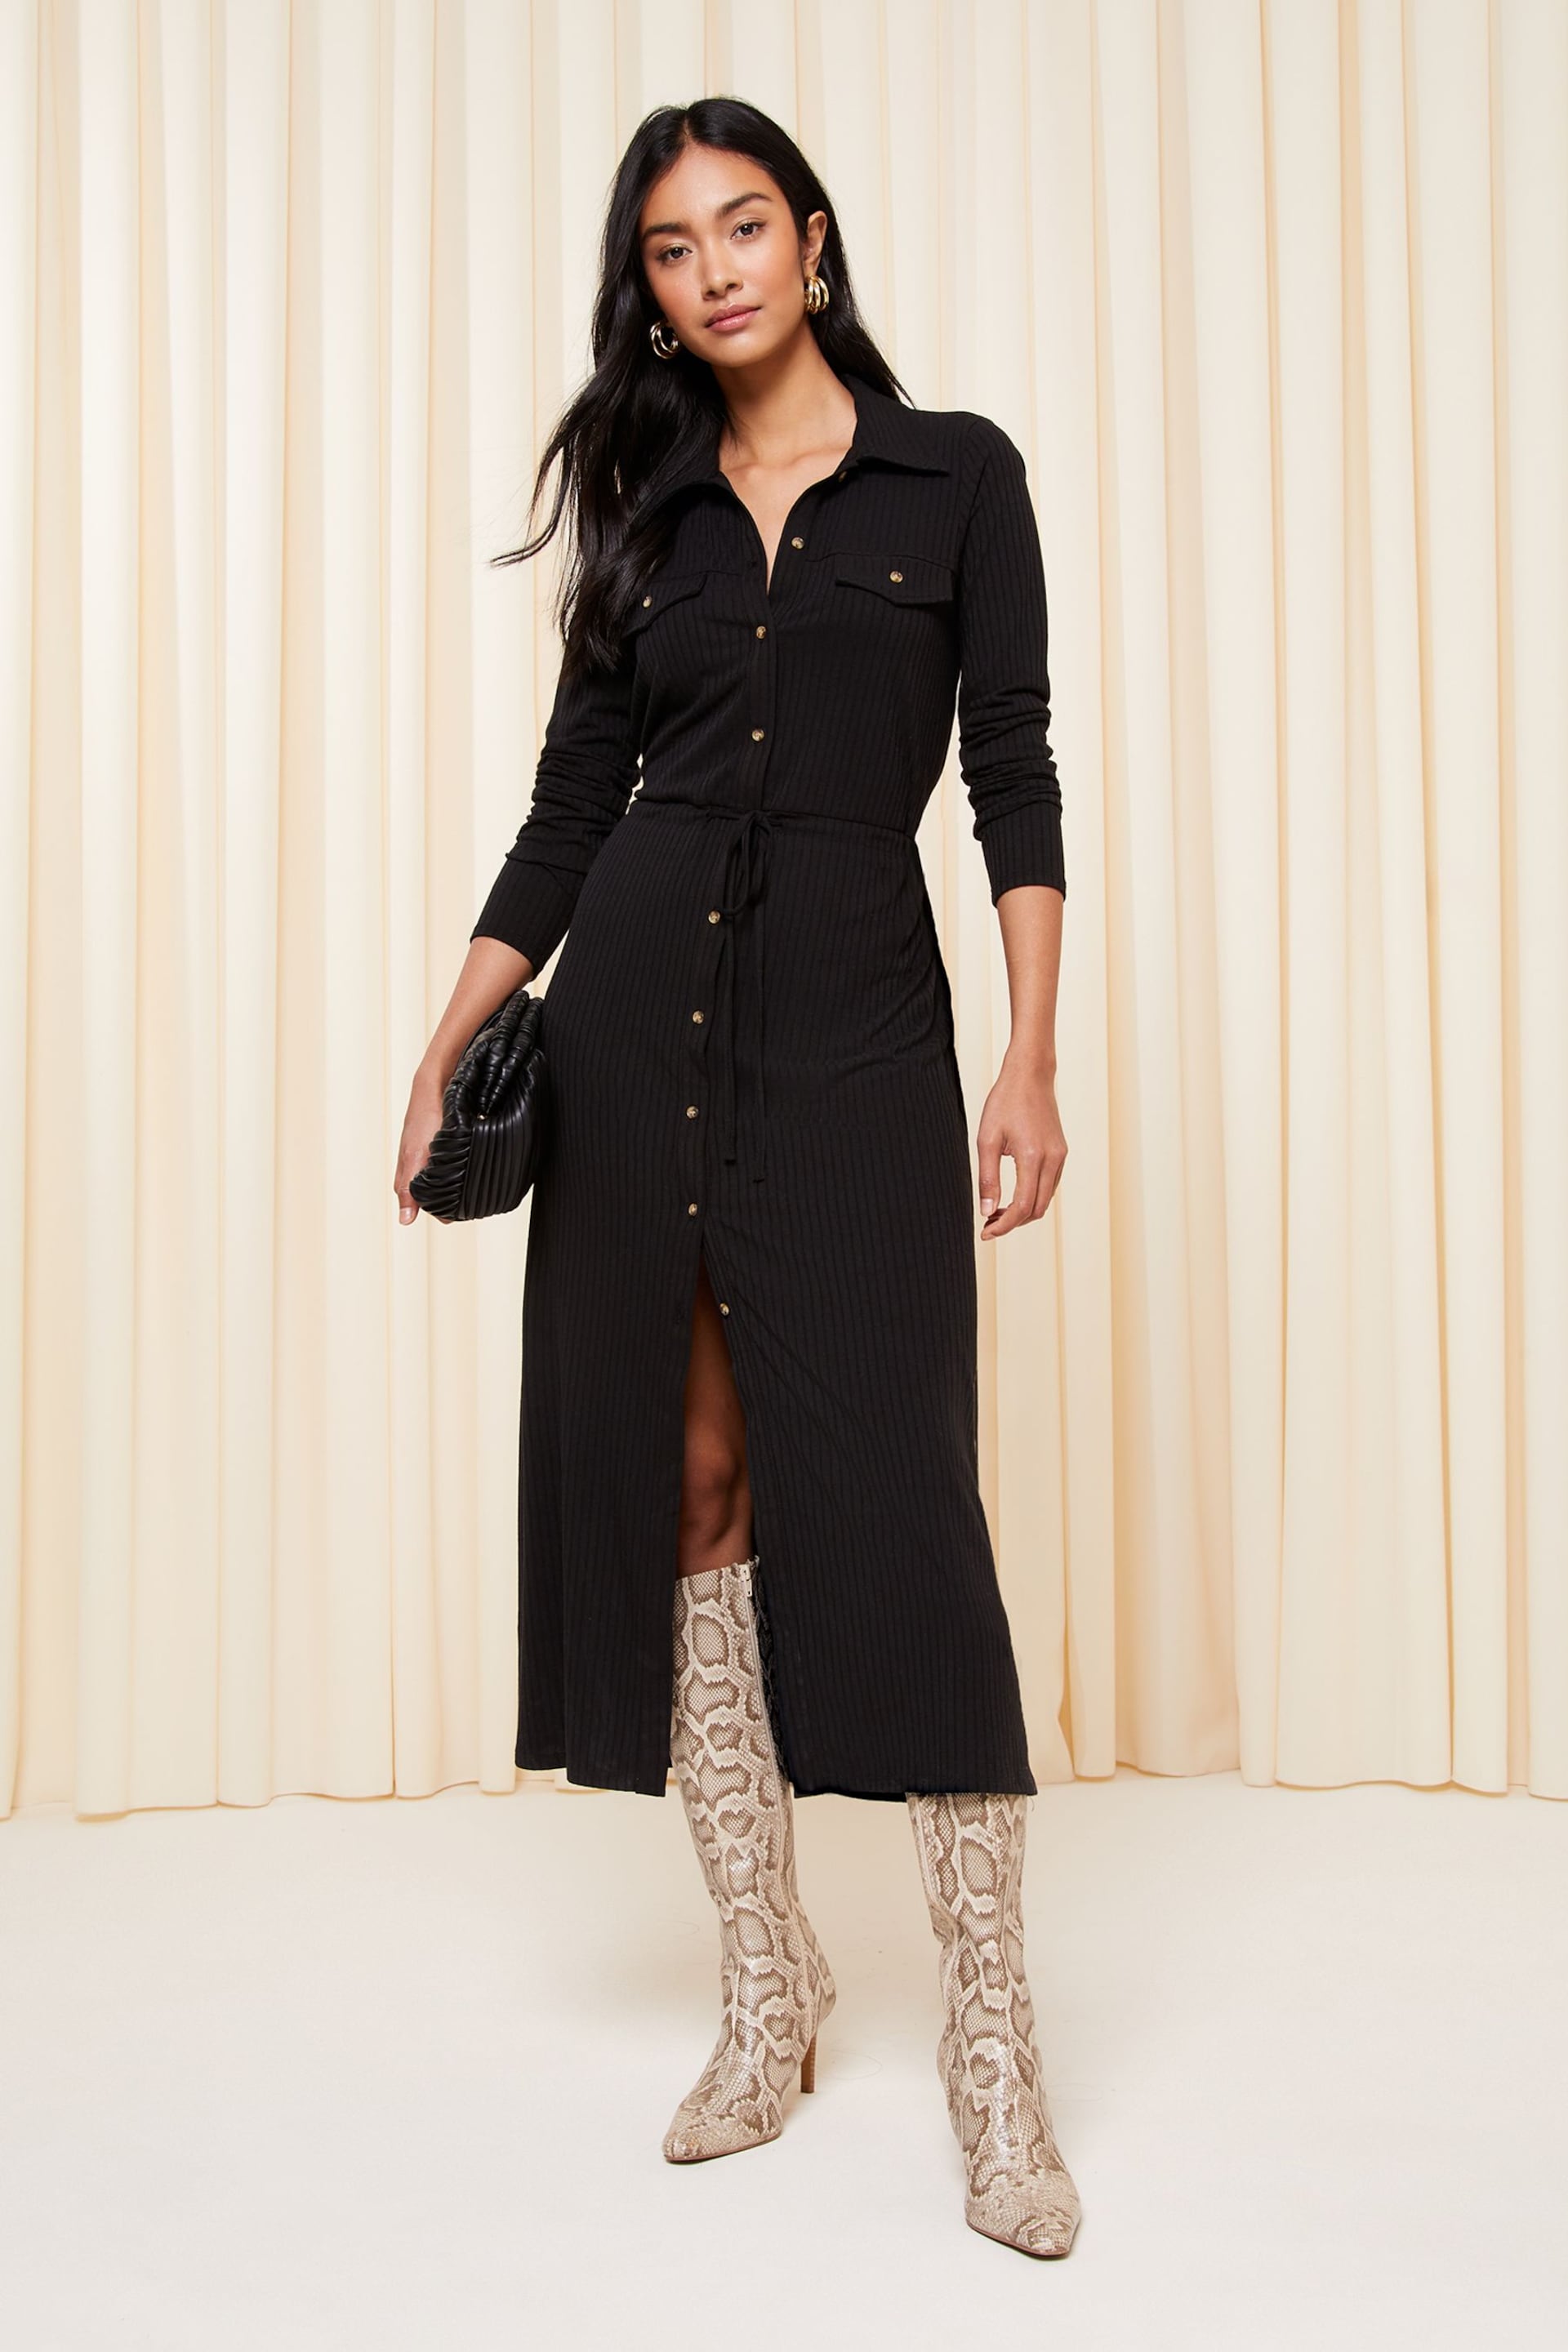 Friends Like These Black Petite Belted Textured Long Sleeve Midi Shirt Dress - Image 1 of 4